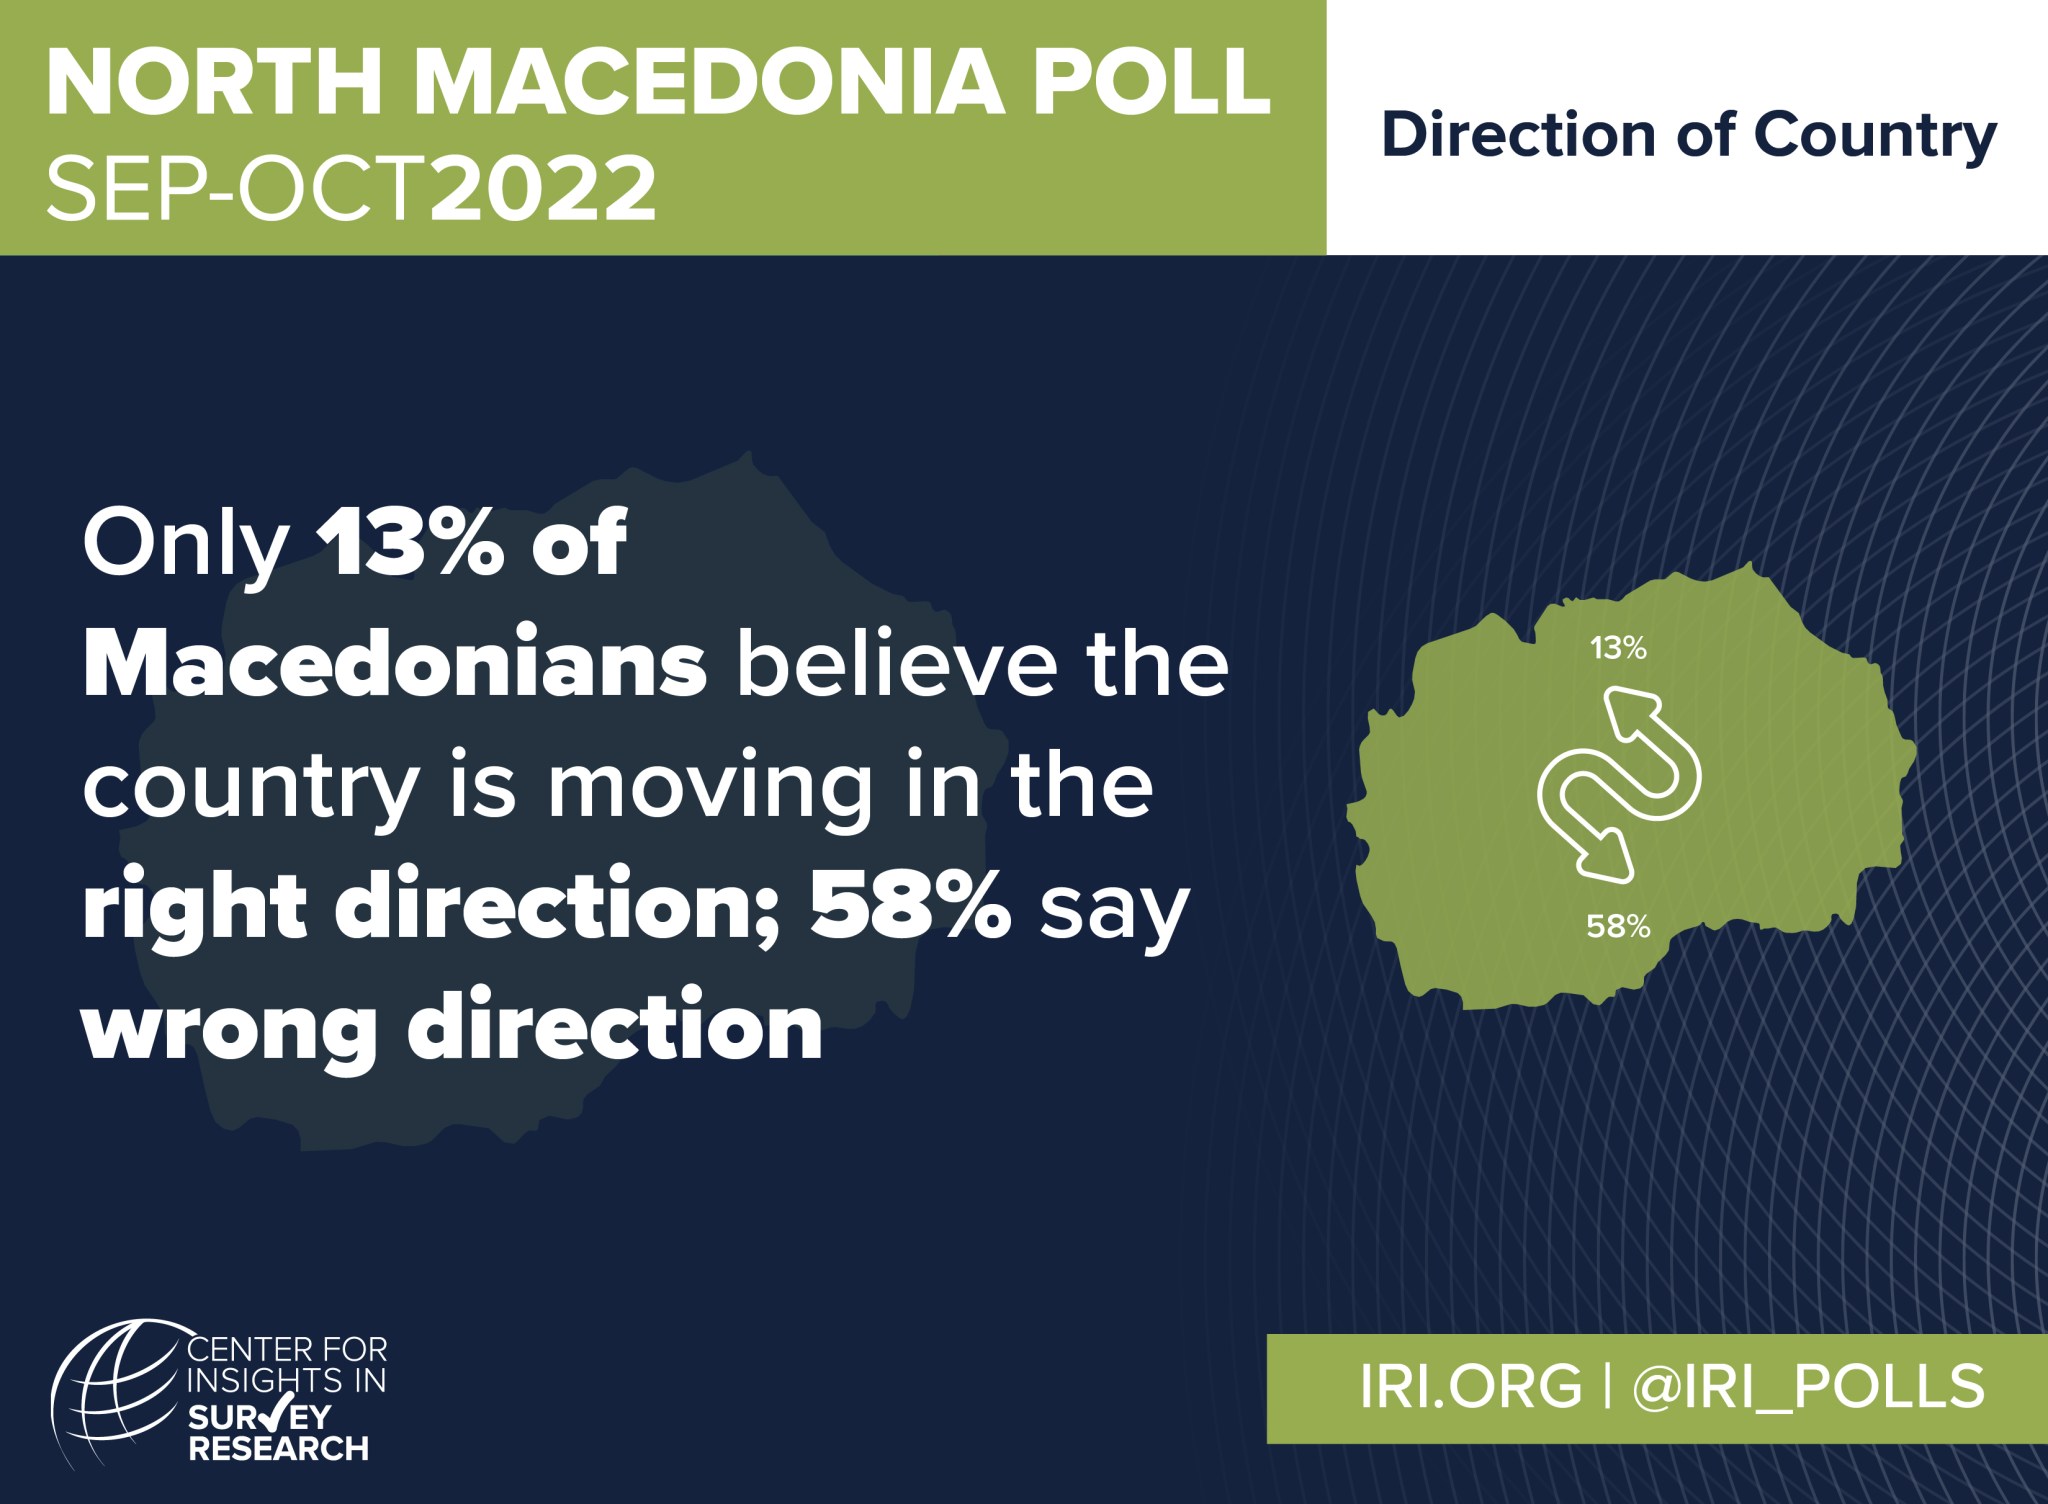 Graphic: North Macedonia Poll Sept-Oct 2022. Only 13 percent of Macedonians believe the country is moving in the right direction; 58 percent say wrong direction.